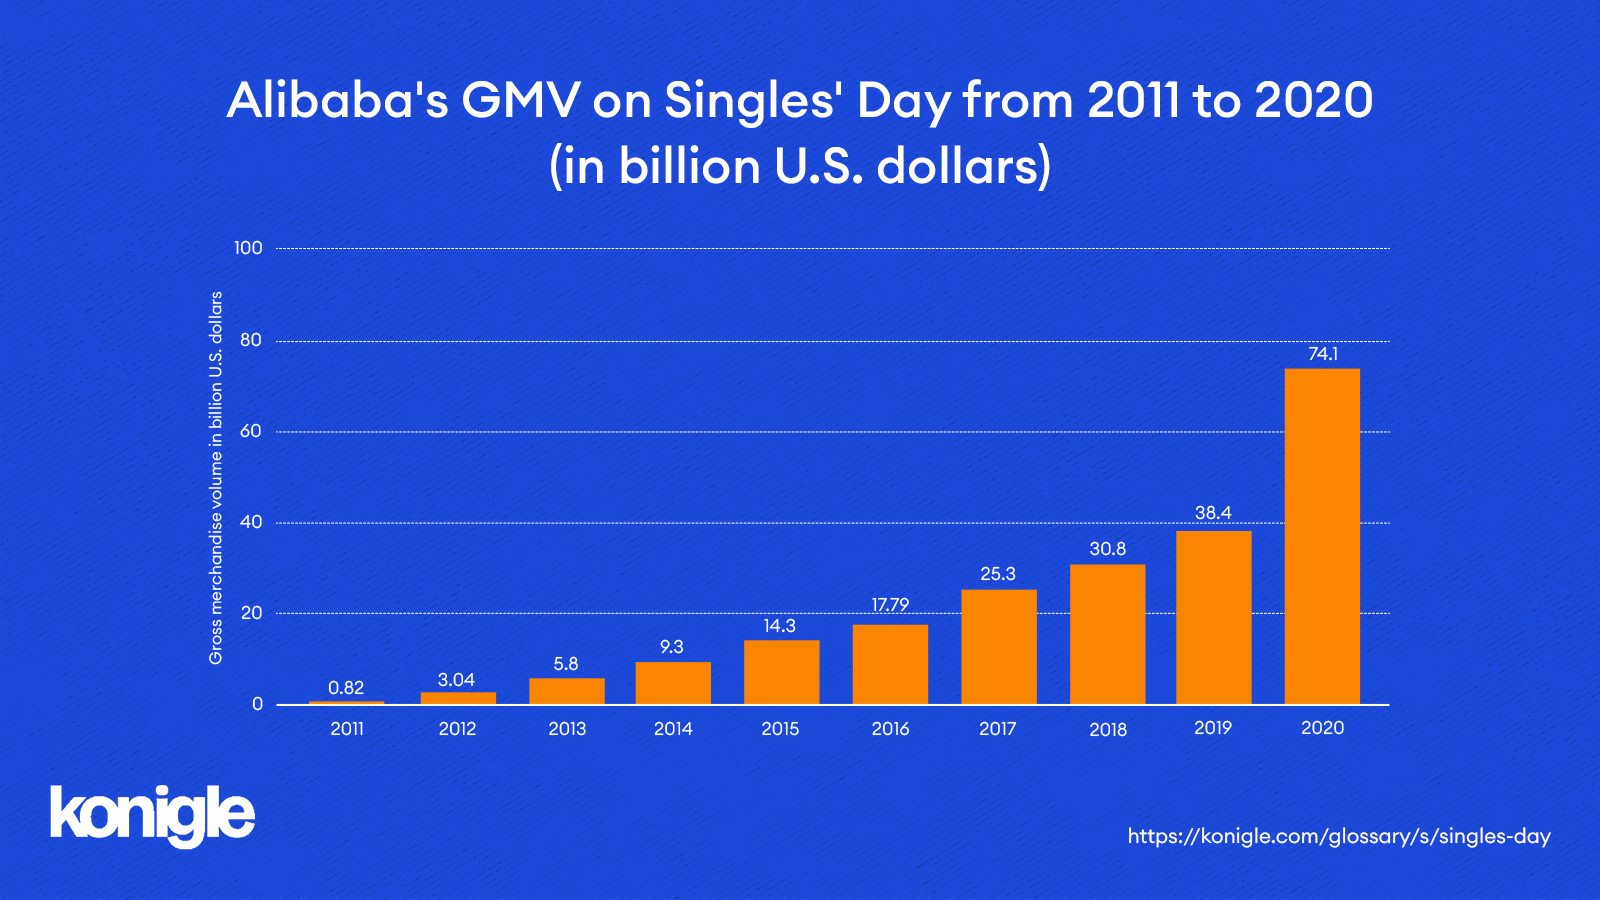 Alibaba's GMV on Singles' Day from 2011 to 2020